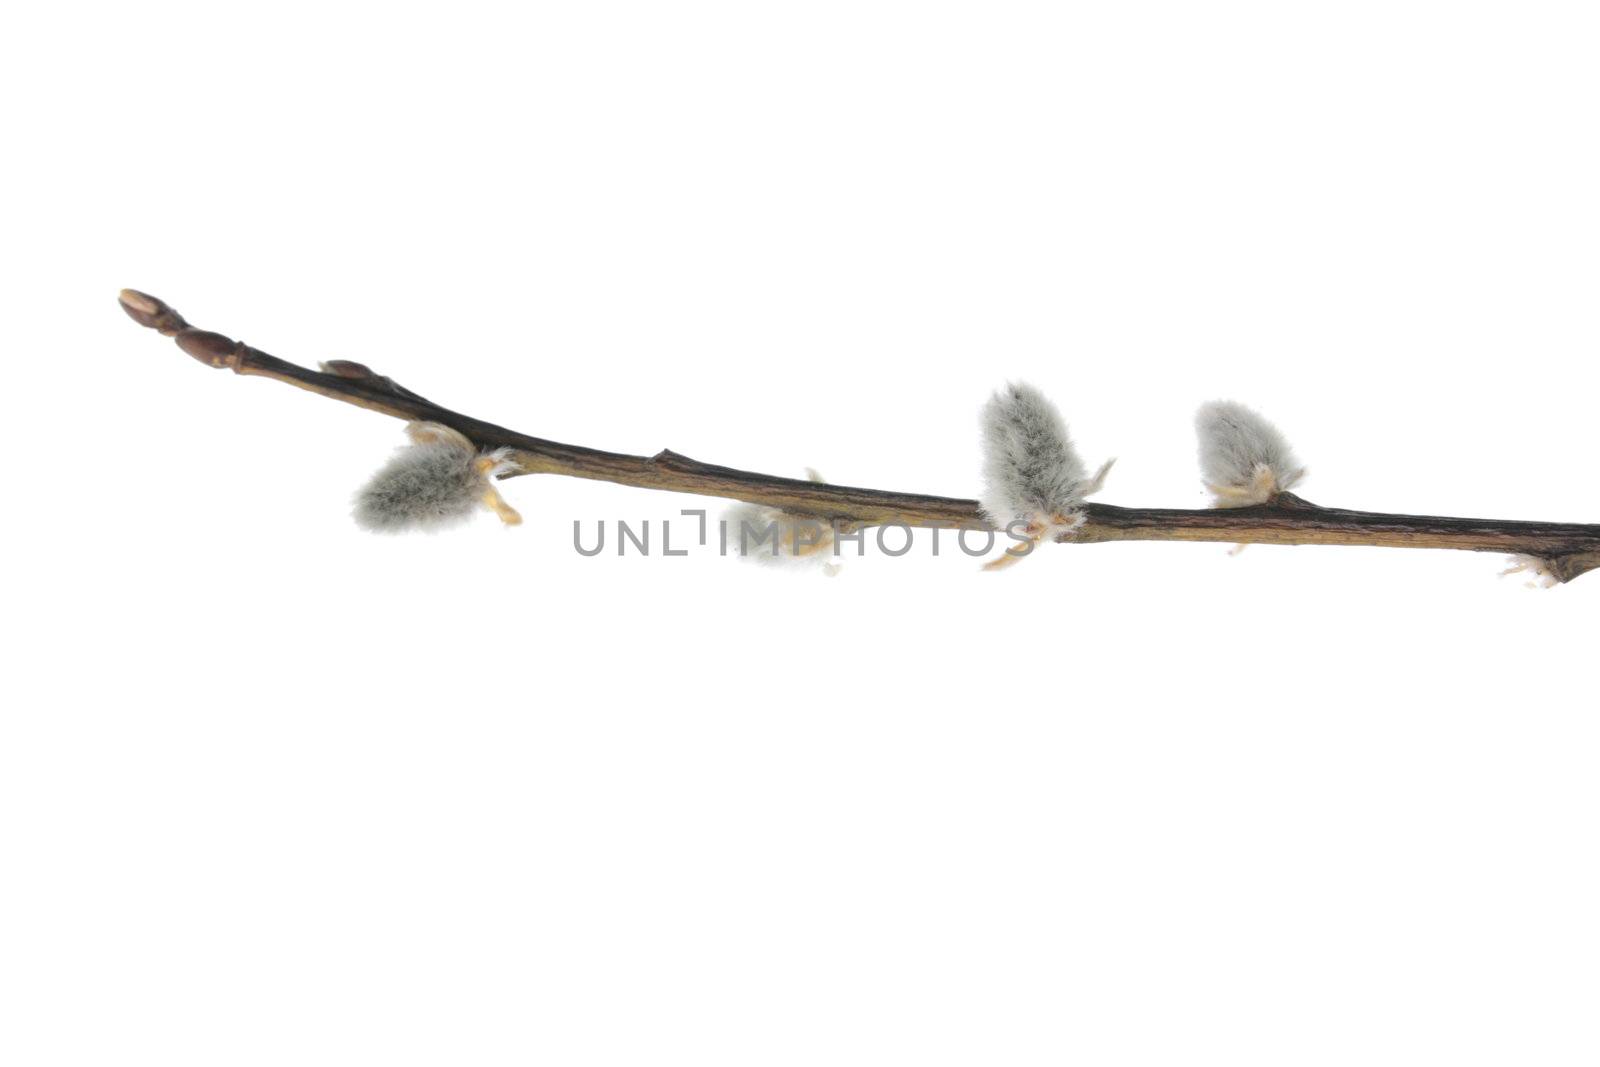 Twigs of willow with catkins on a white background - easter symbol